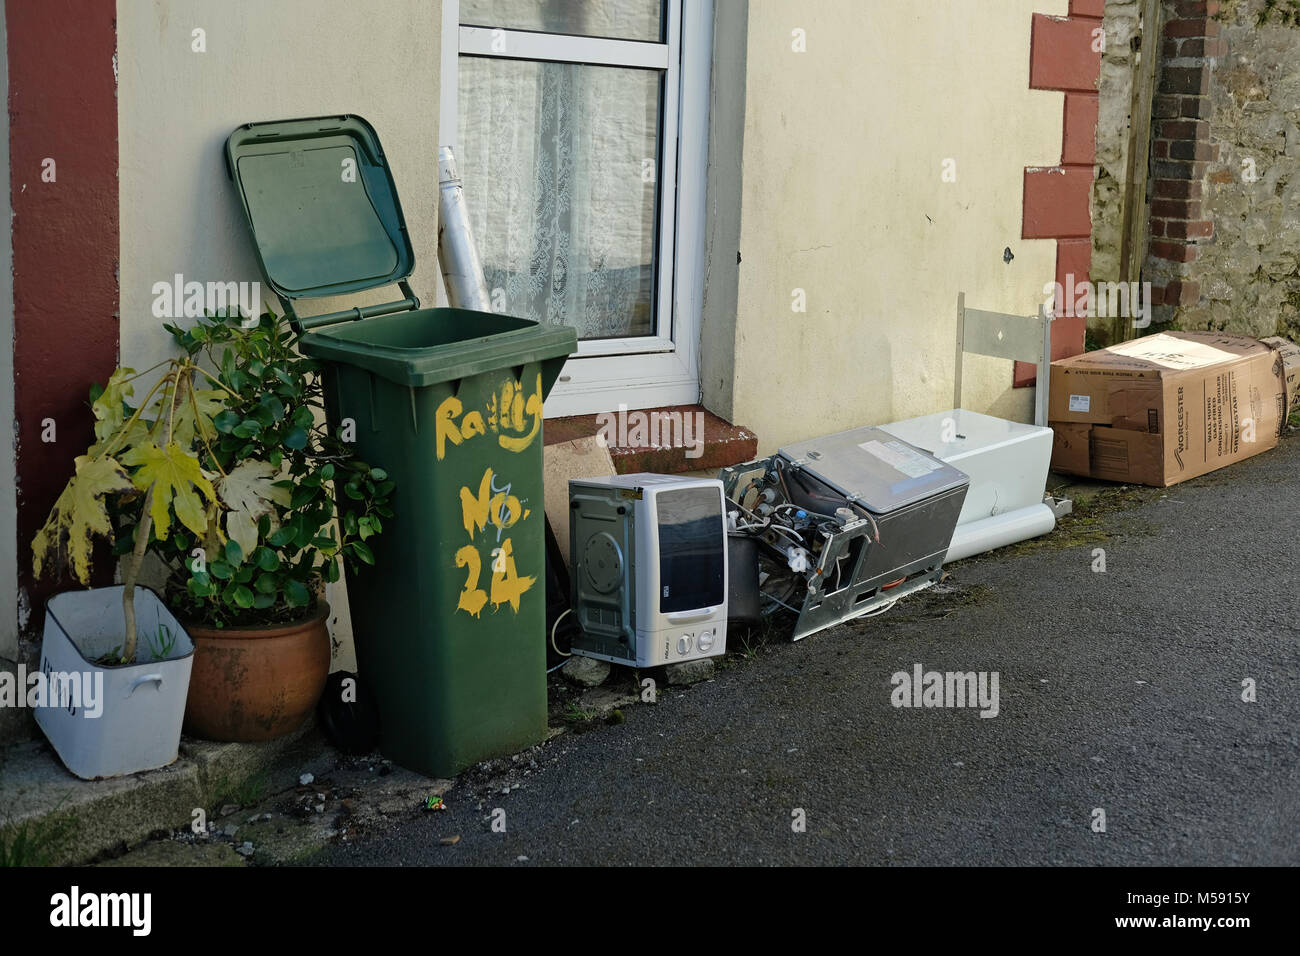 Electrical goods dumped outside a house. Stock Photo